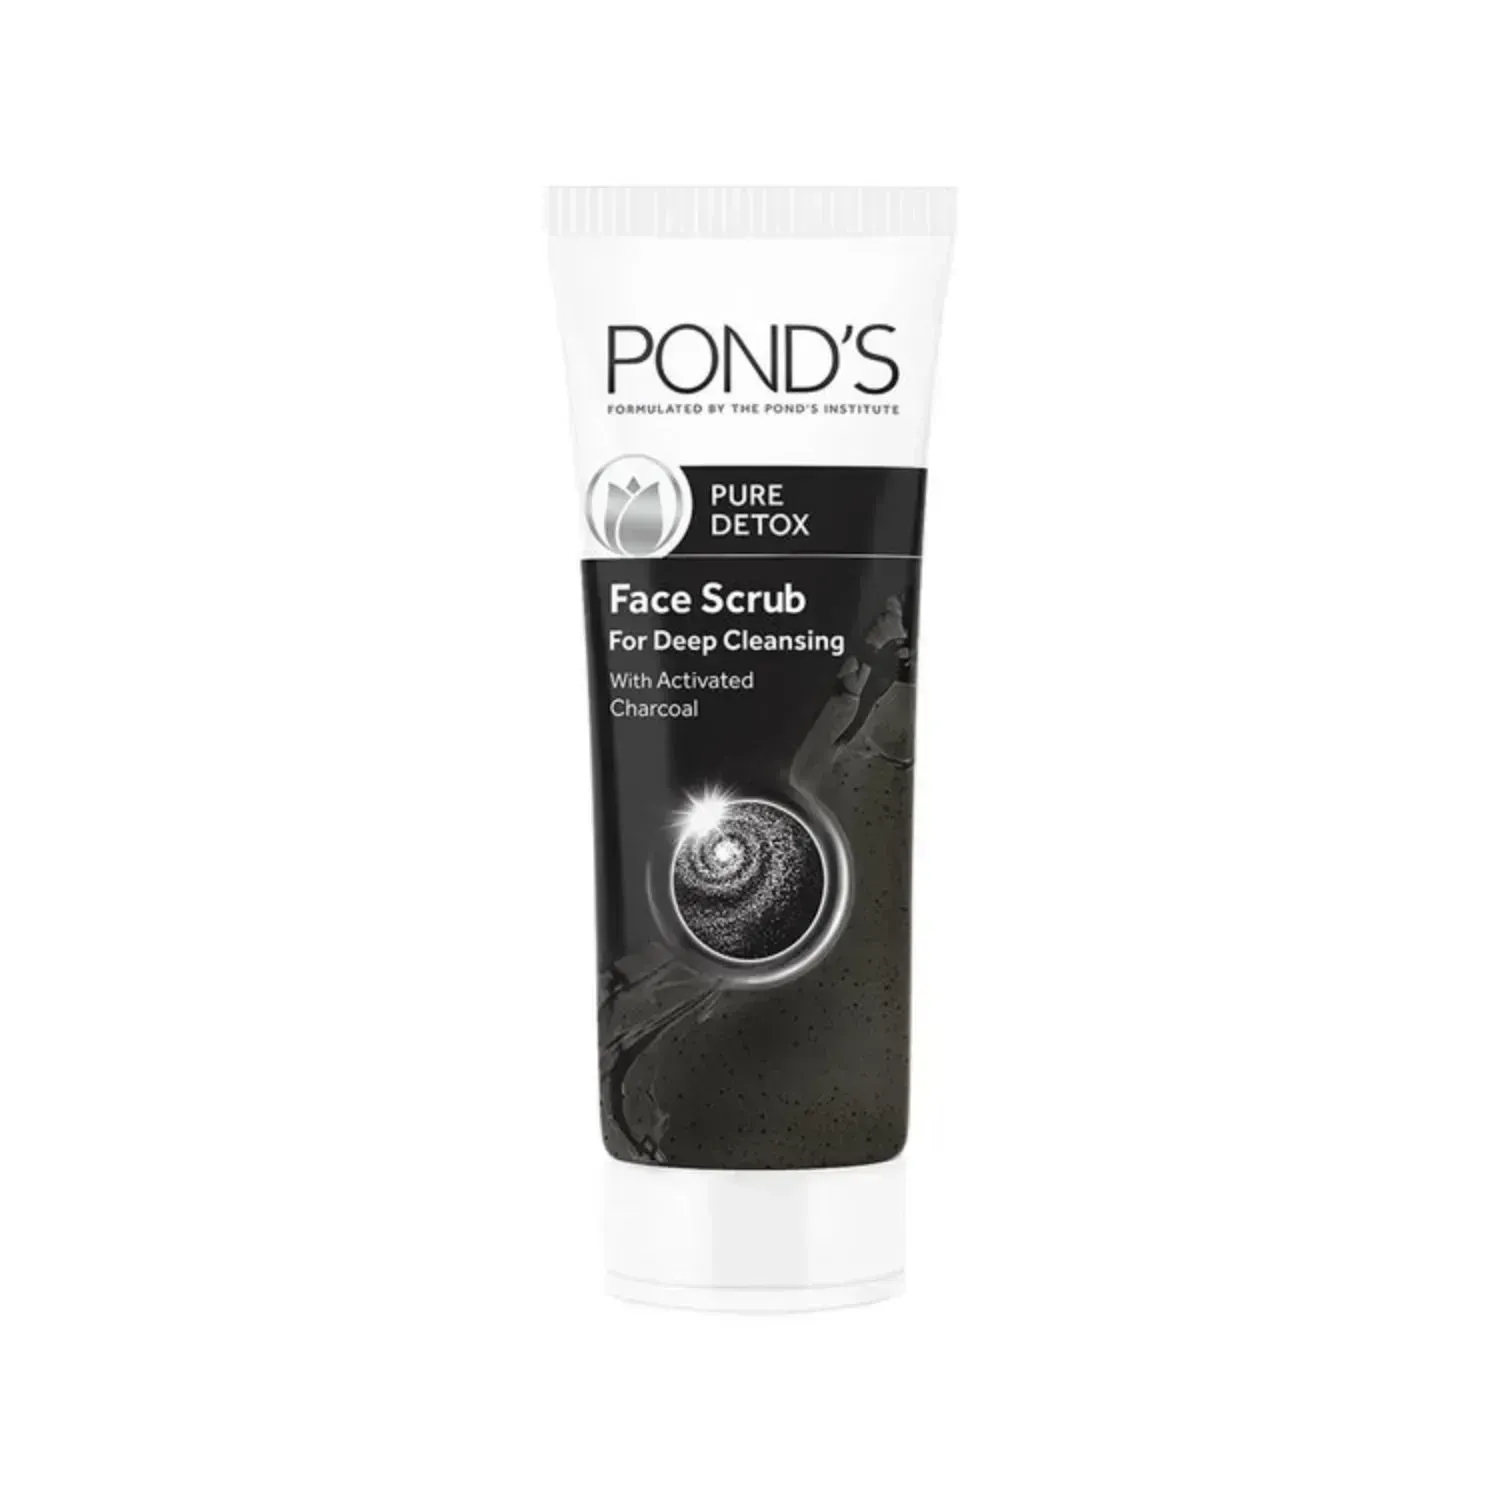 Pond's | Pond's Pure Detox Face Gel Scrub For Deep Cleansing - (100g)